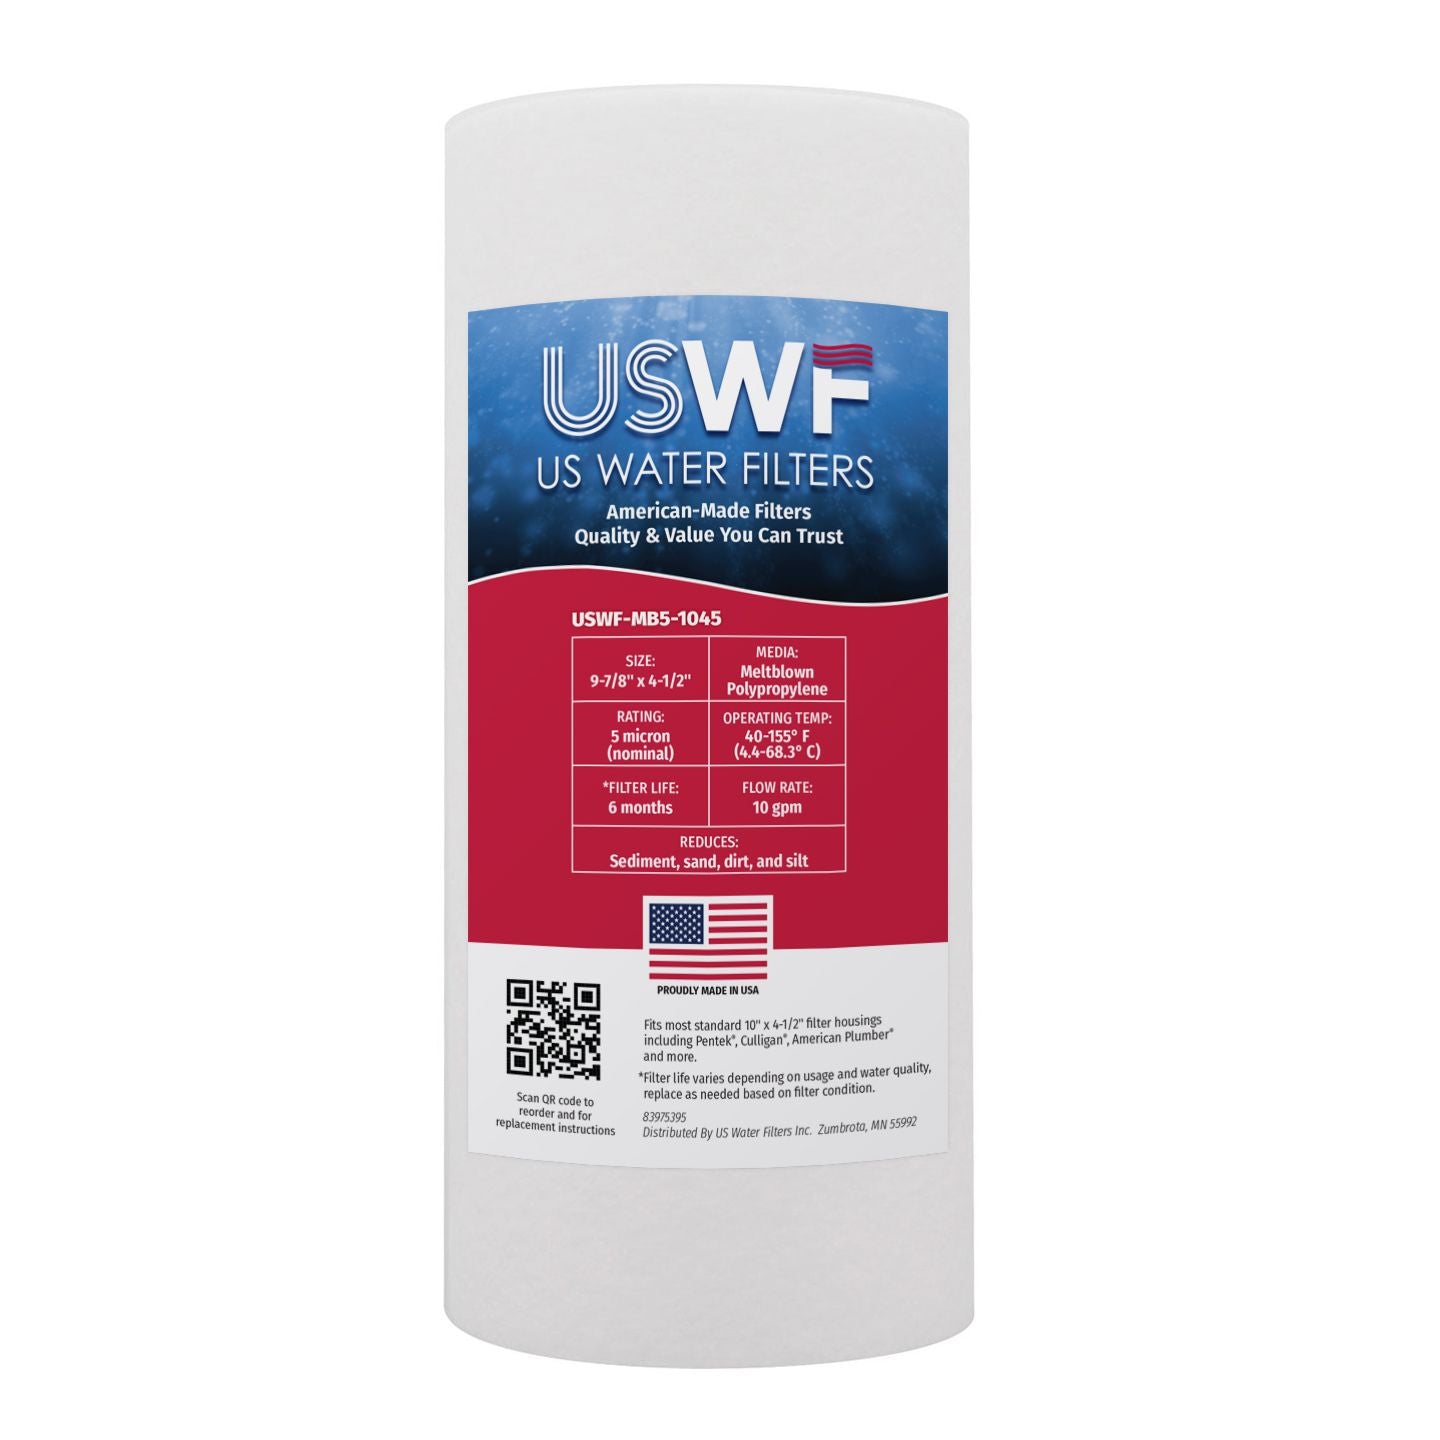 USWF Chloramine Dual 10" 2-Stage Filtration System, Sediment & Chloramine Carbon Block Filters, 1" Inlet/Outleter 3